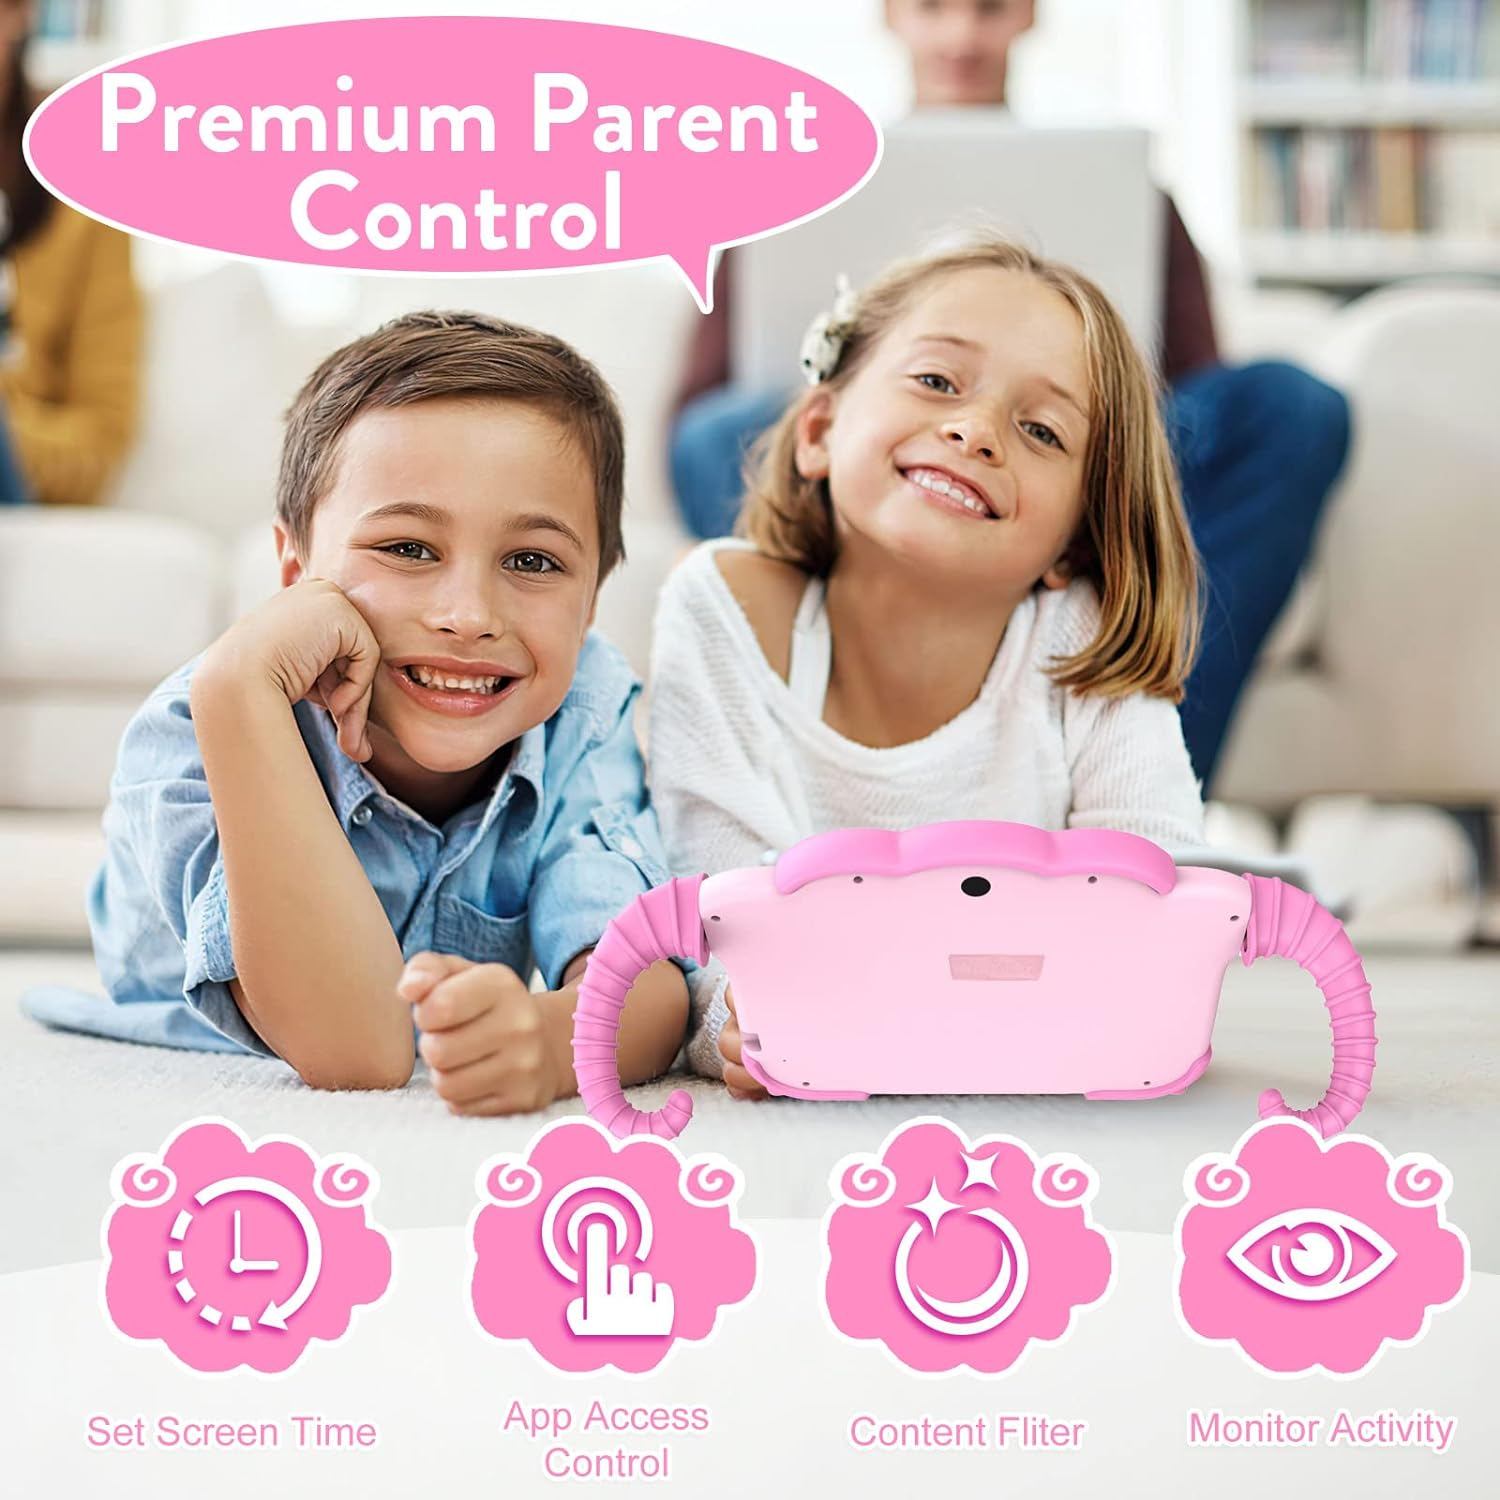 Kids Tablet 7 inch Tablet for Kids Toddlers Tablet with Case WiFi Dual Camera, Kids Android Learning Tablet Kids Software Installed Parental Control for Boys Girls YouTube Netflix